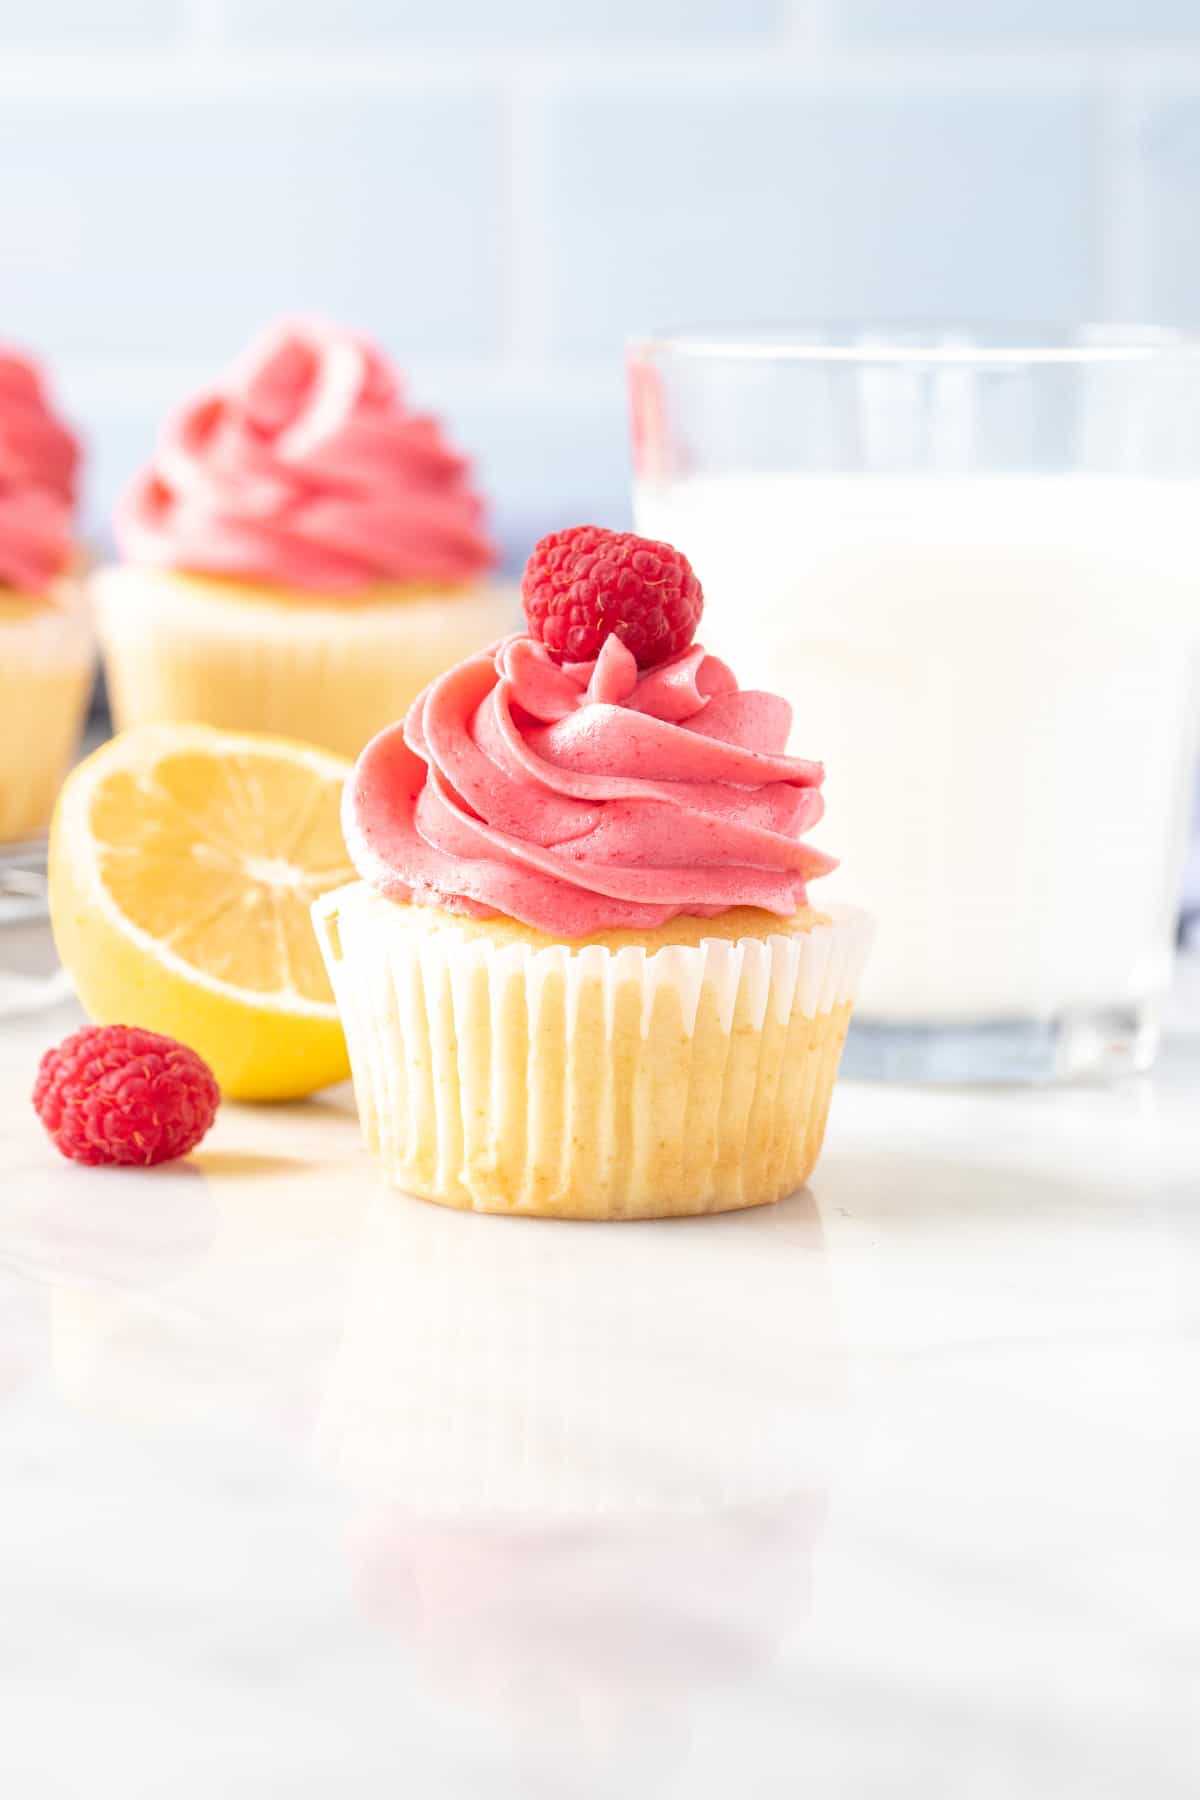 Lemon cupcake with pink frosting with a glass of milk